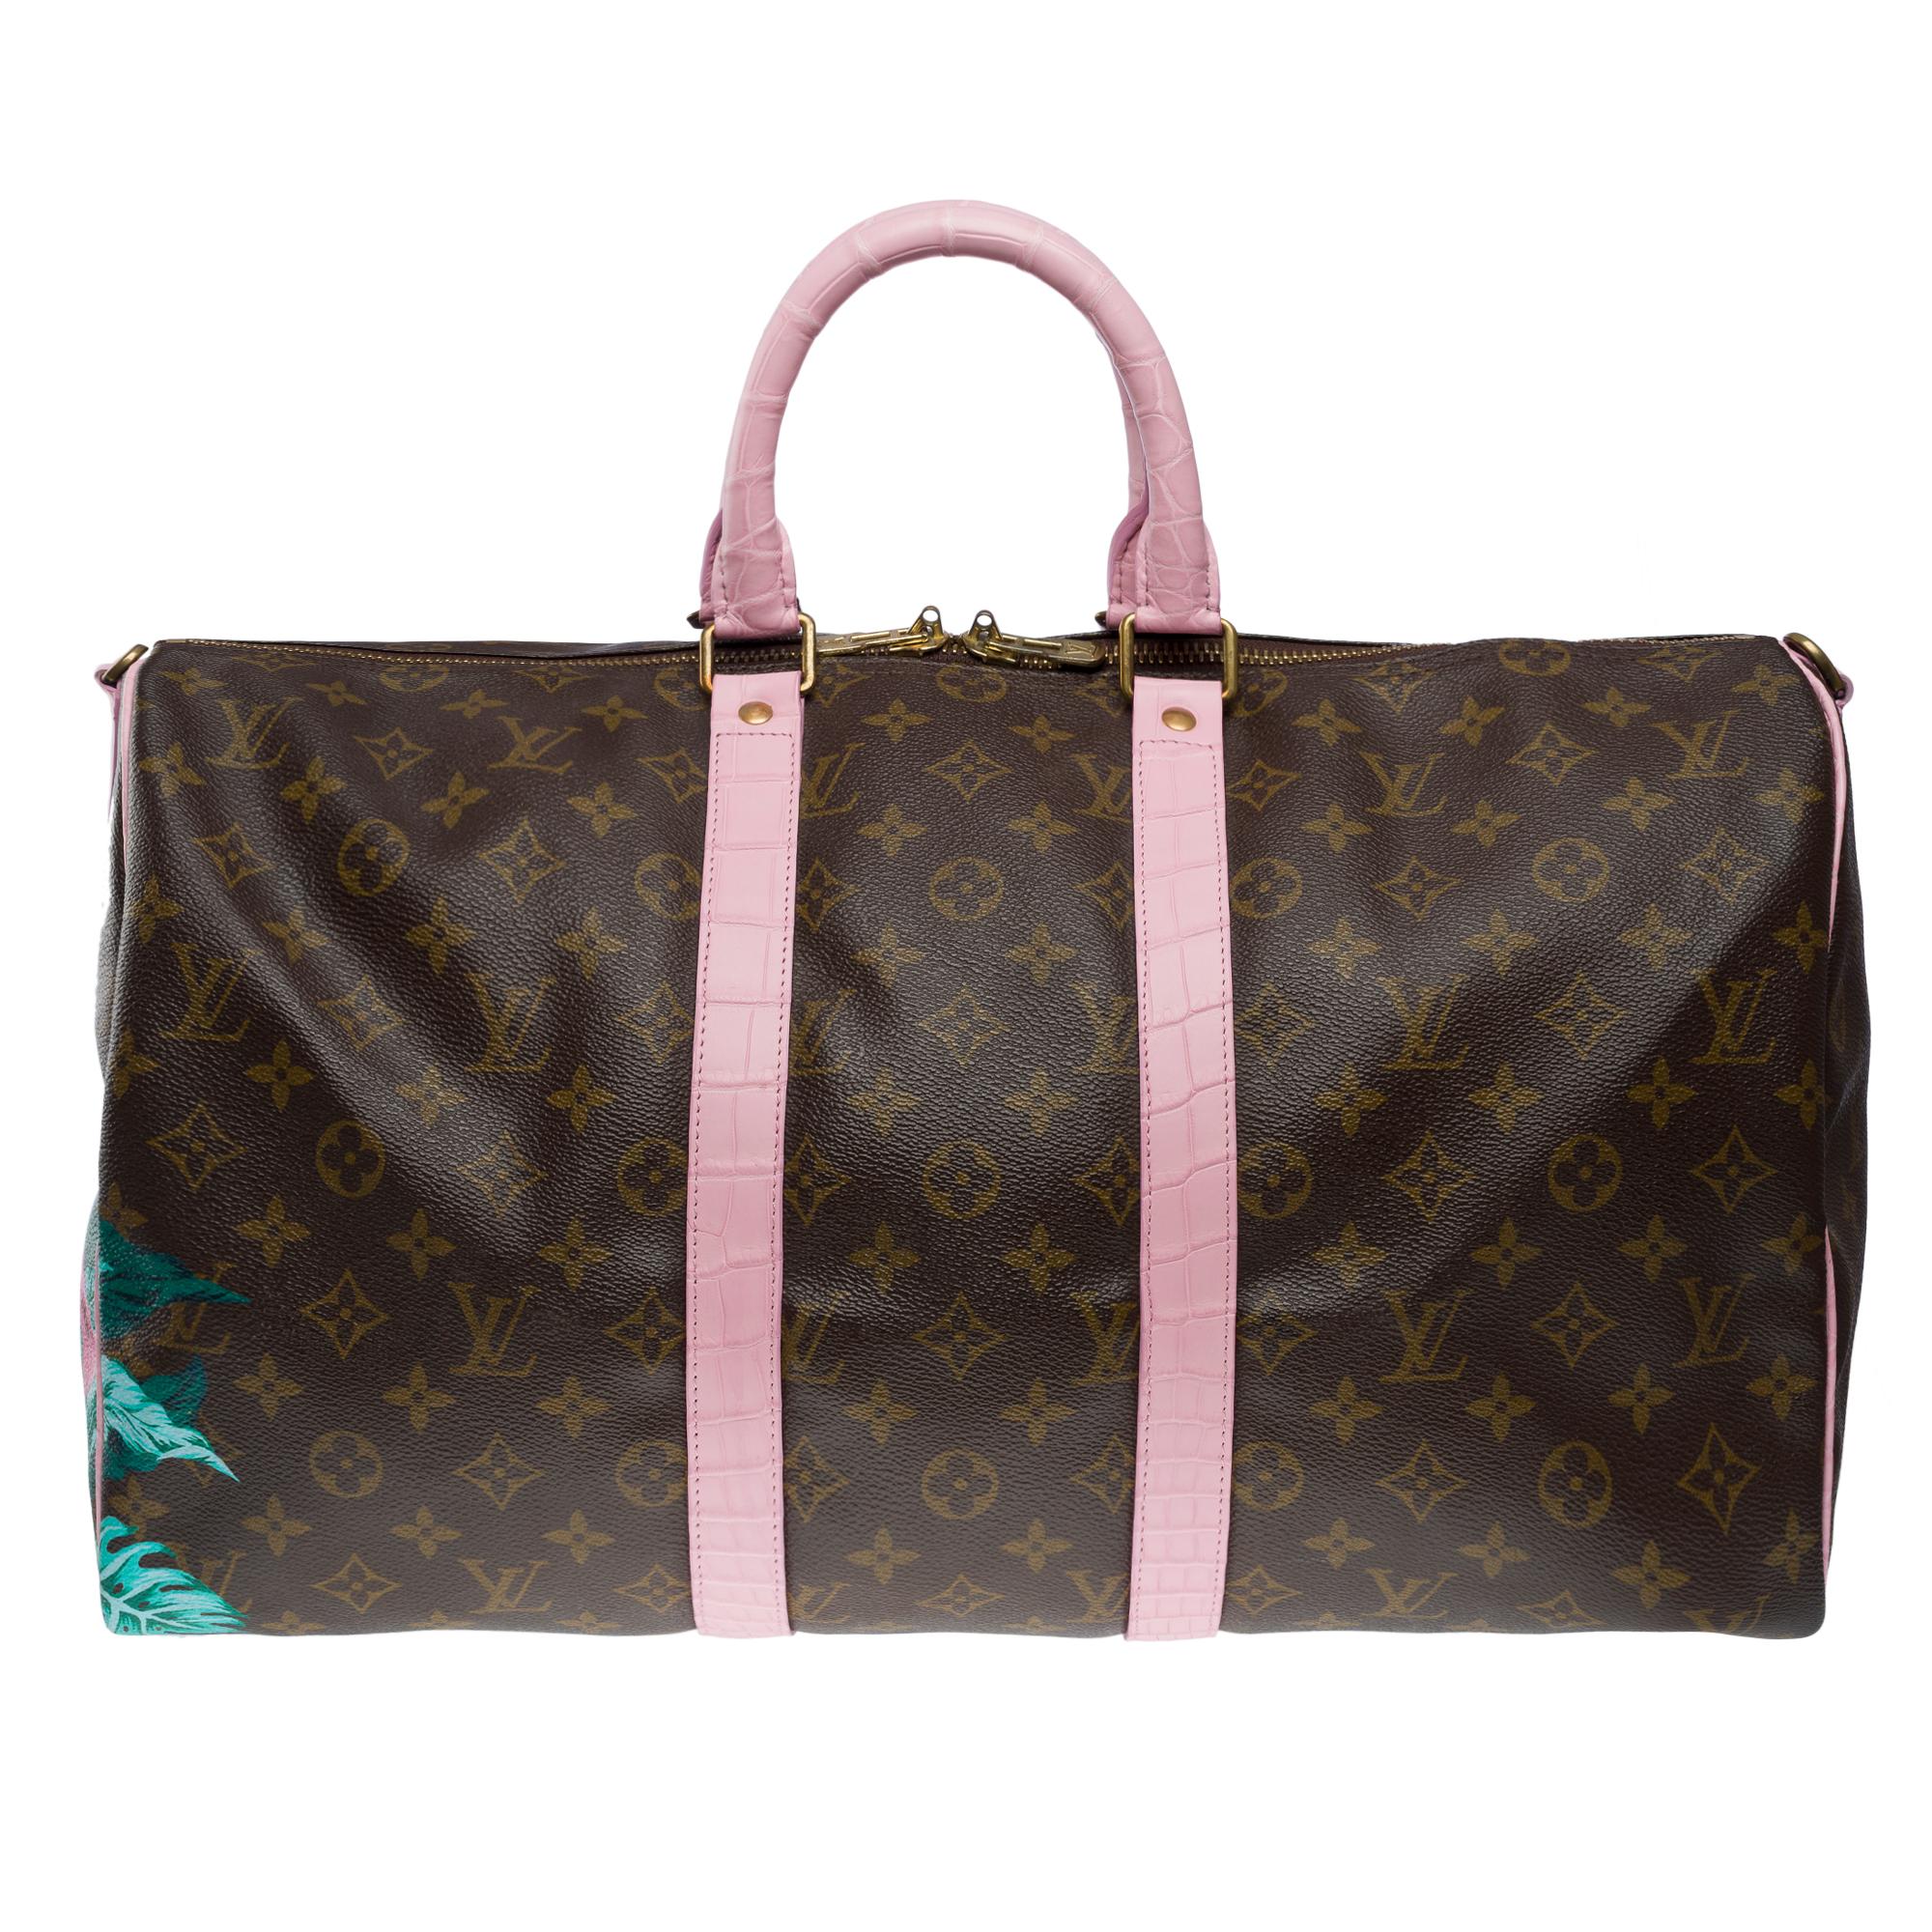 Customized Louis Vuitton Keepall 45 Travel bag with Pink Crocodile leather In Good Condition For Sale In Paris, IDF